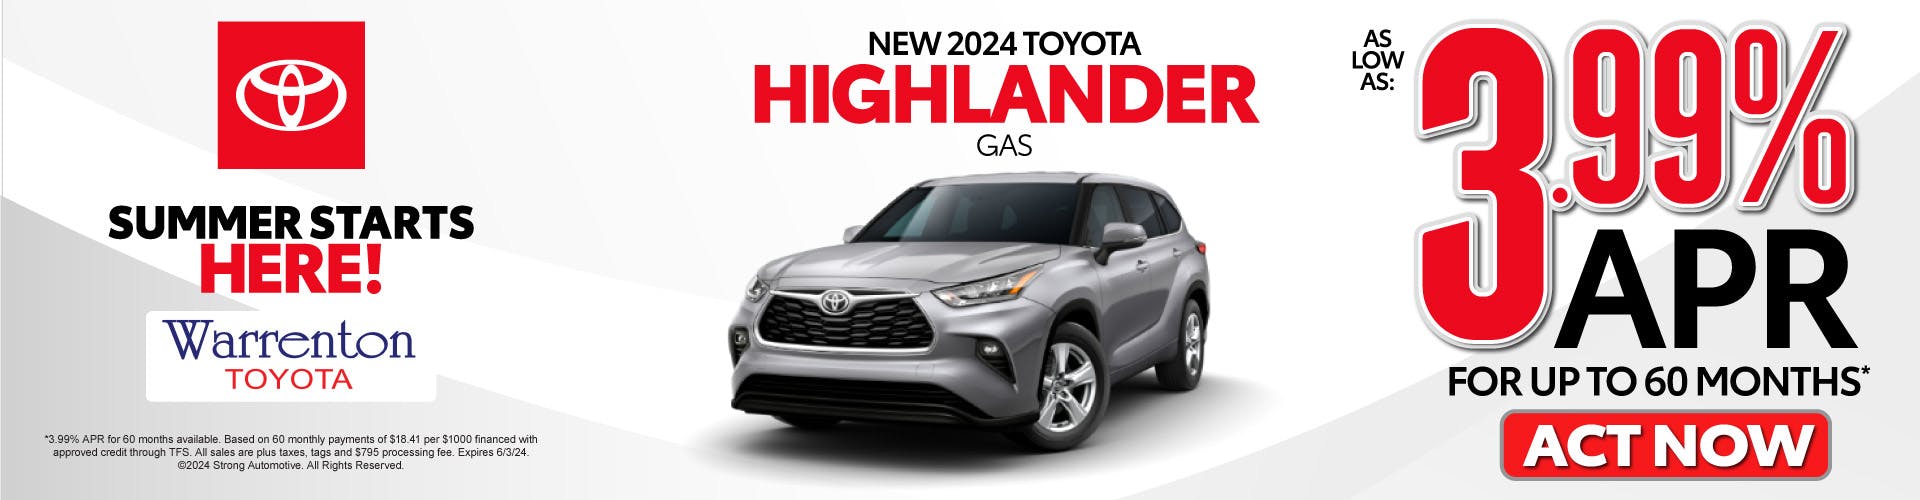 New 2024 Highlander Gas- As Low as 3.99% APR for up to 60 months* – Act Now